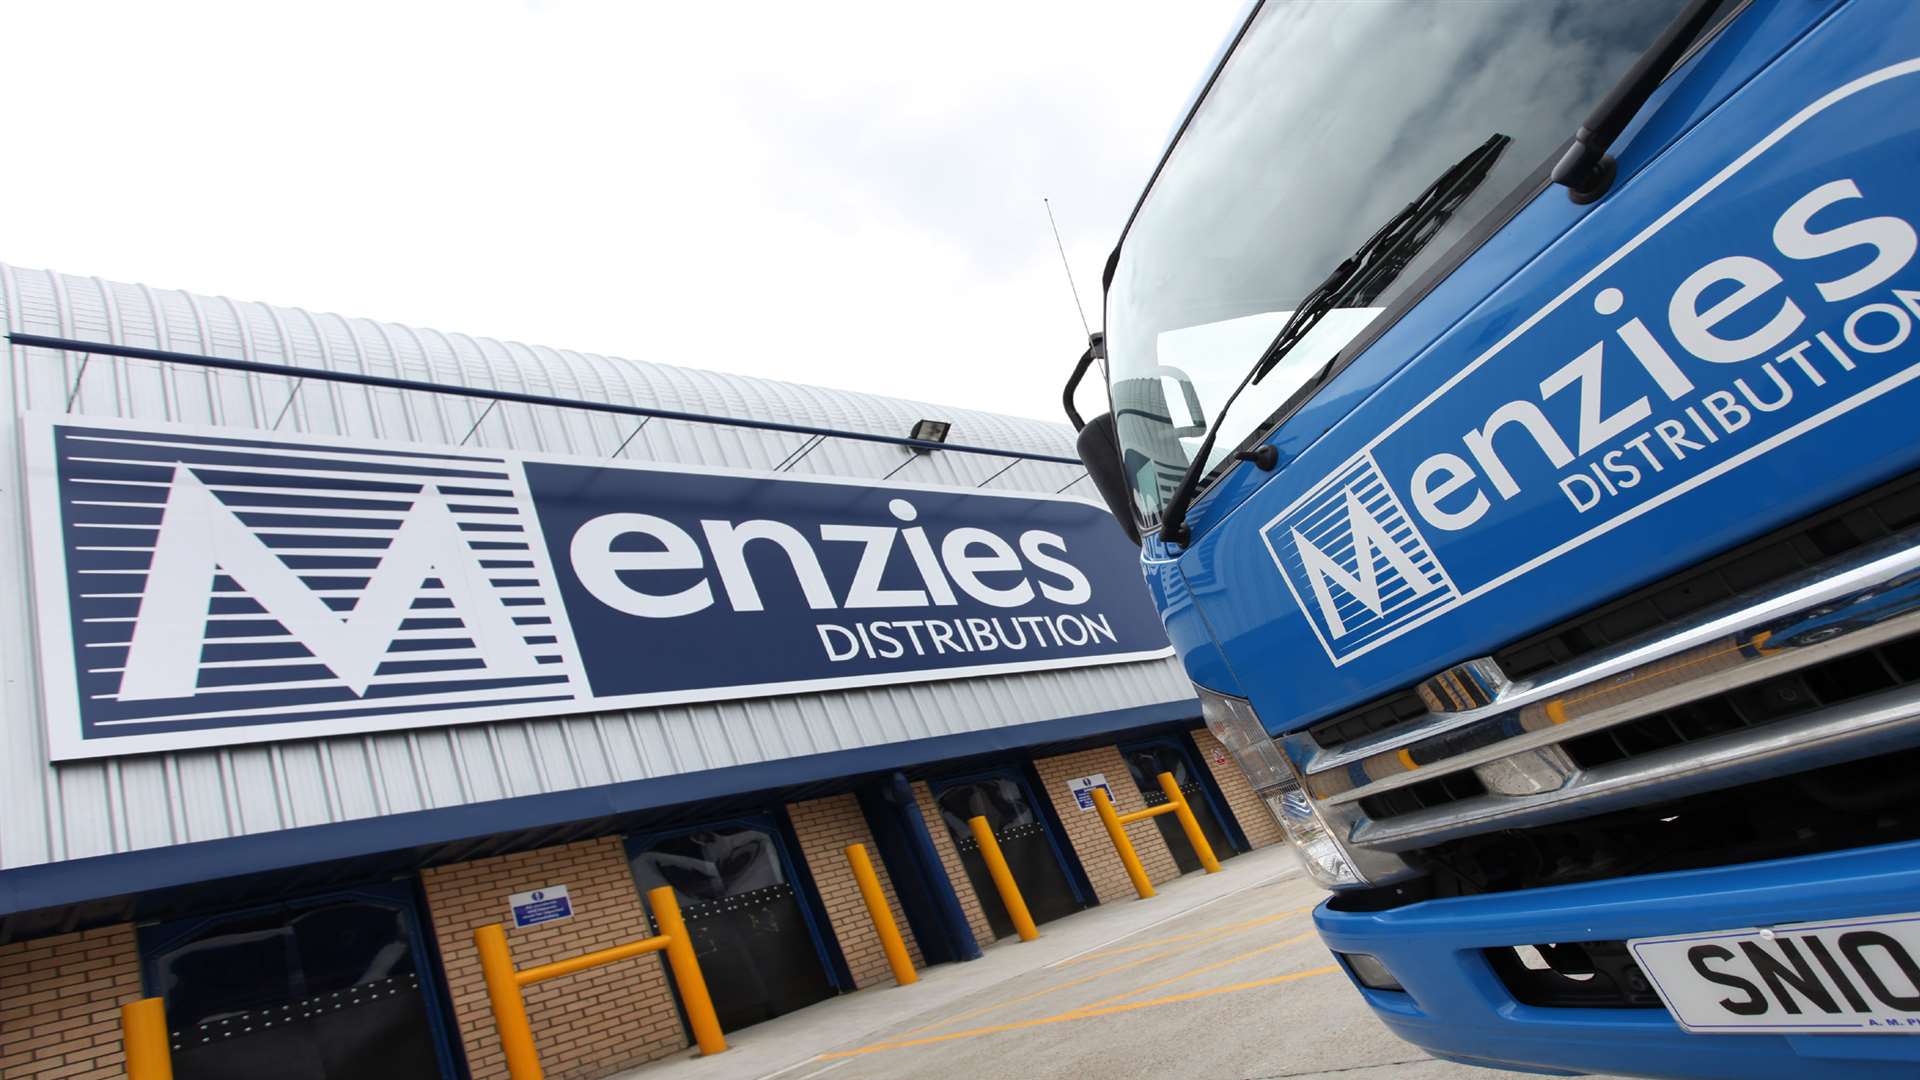 Menzies has depots in Aylesford and Ashford. Pic: Menzies